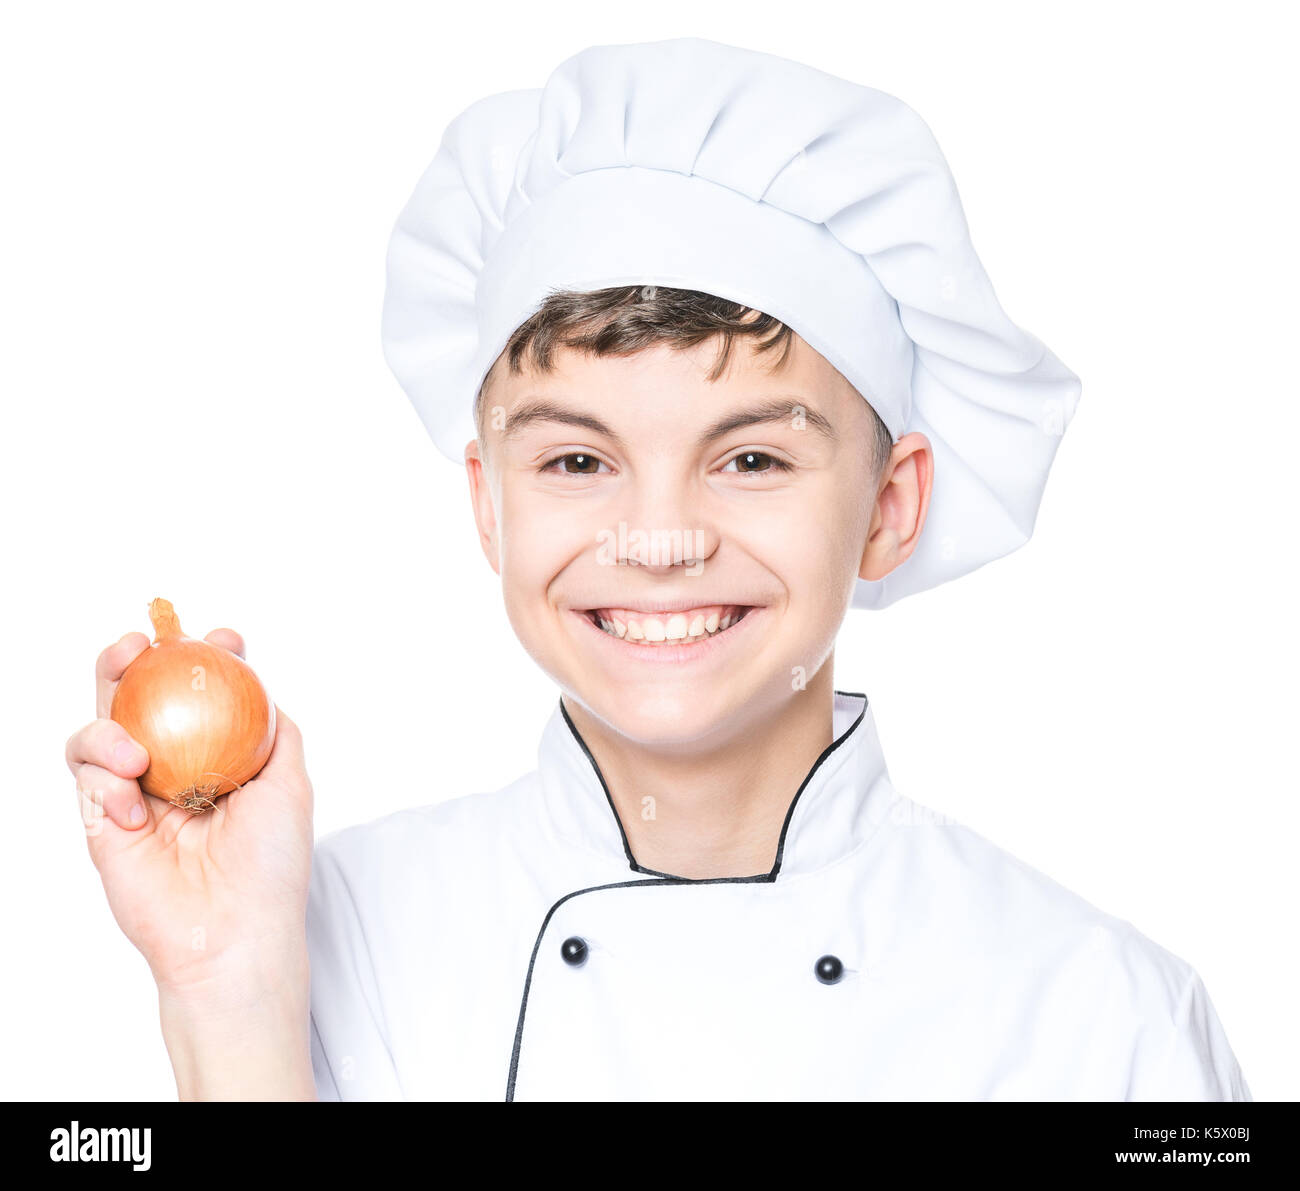 Child holding onion Cut Out Stock Images & Pictures - Alamy